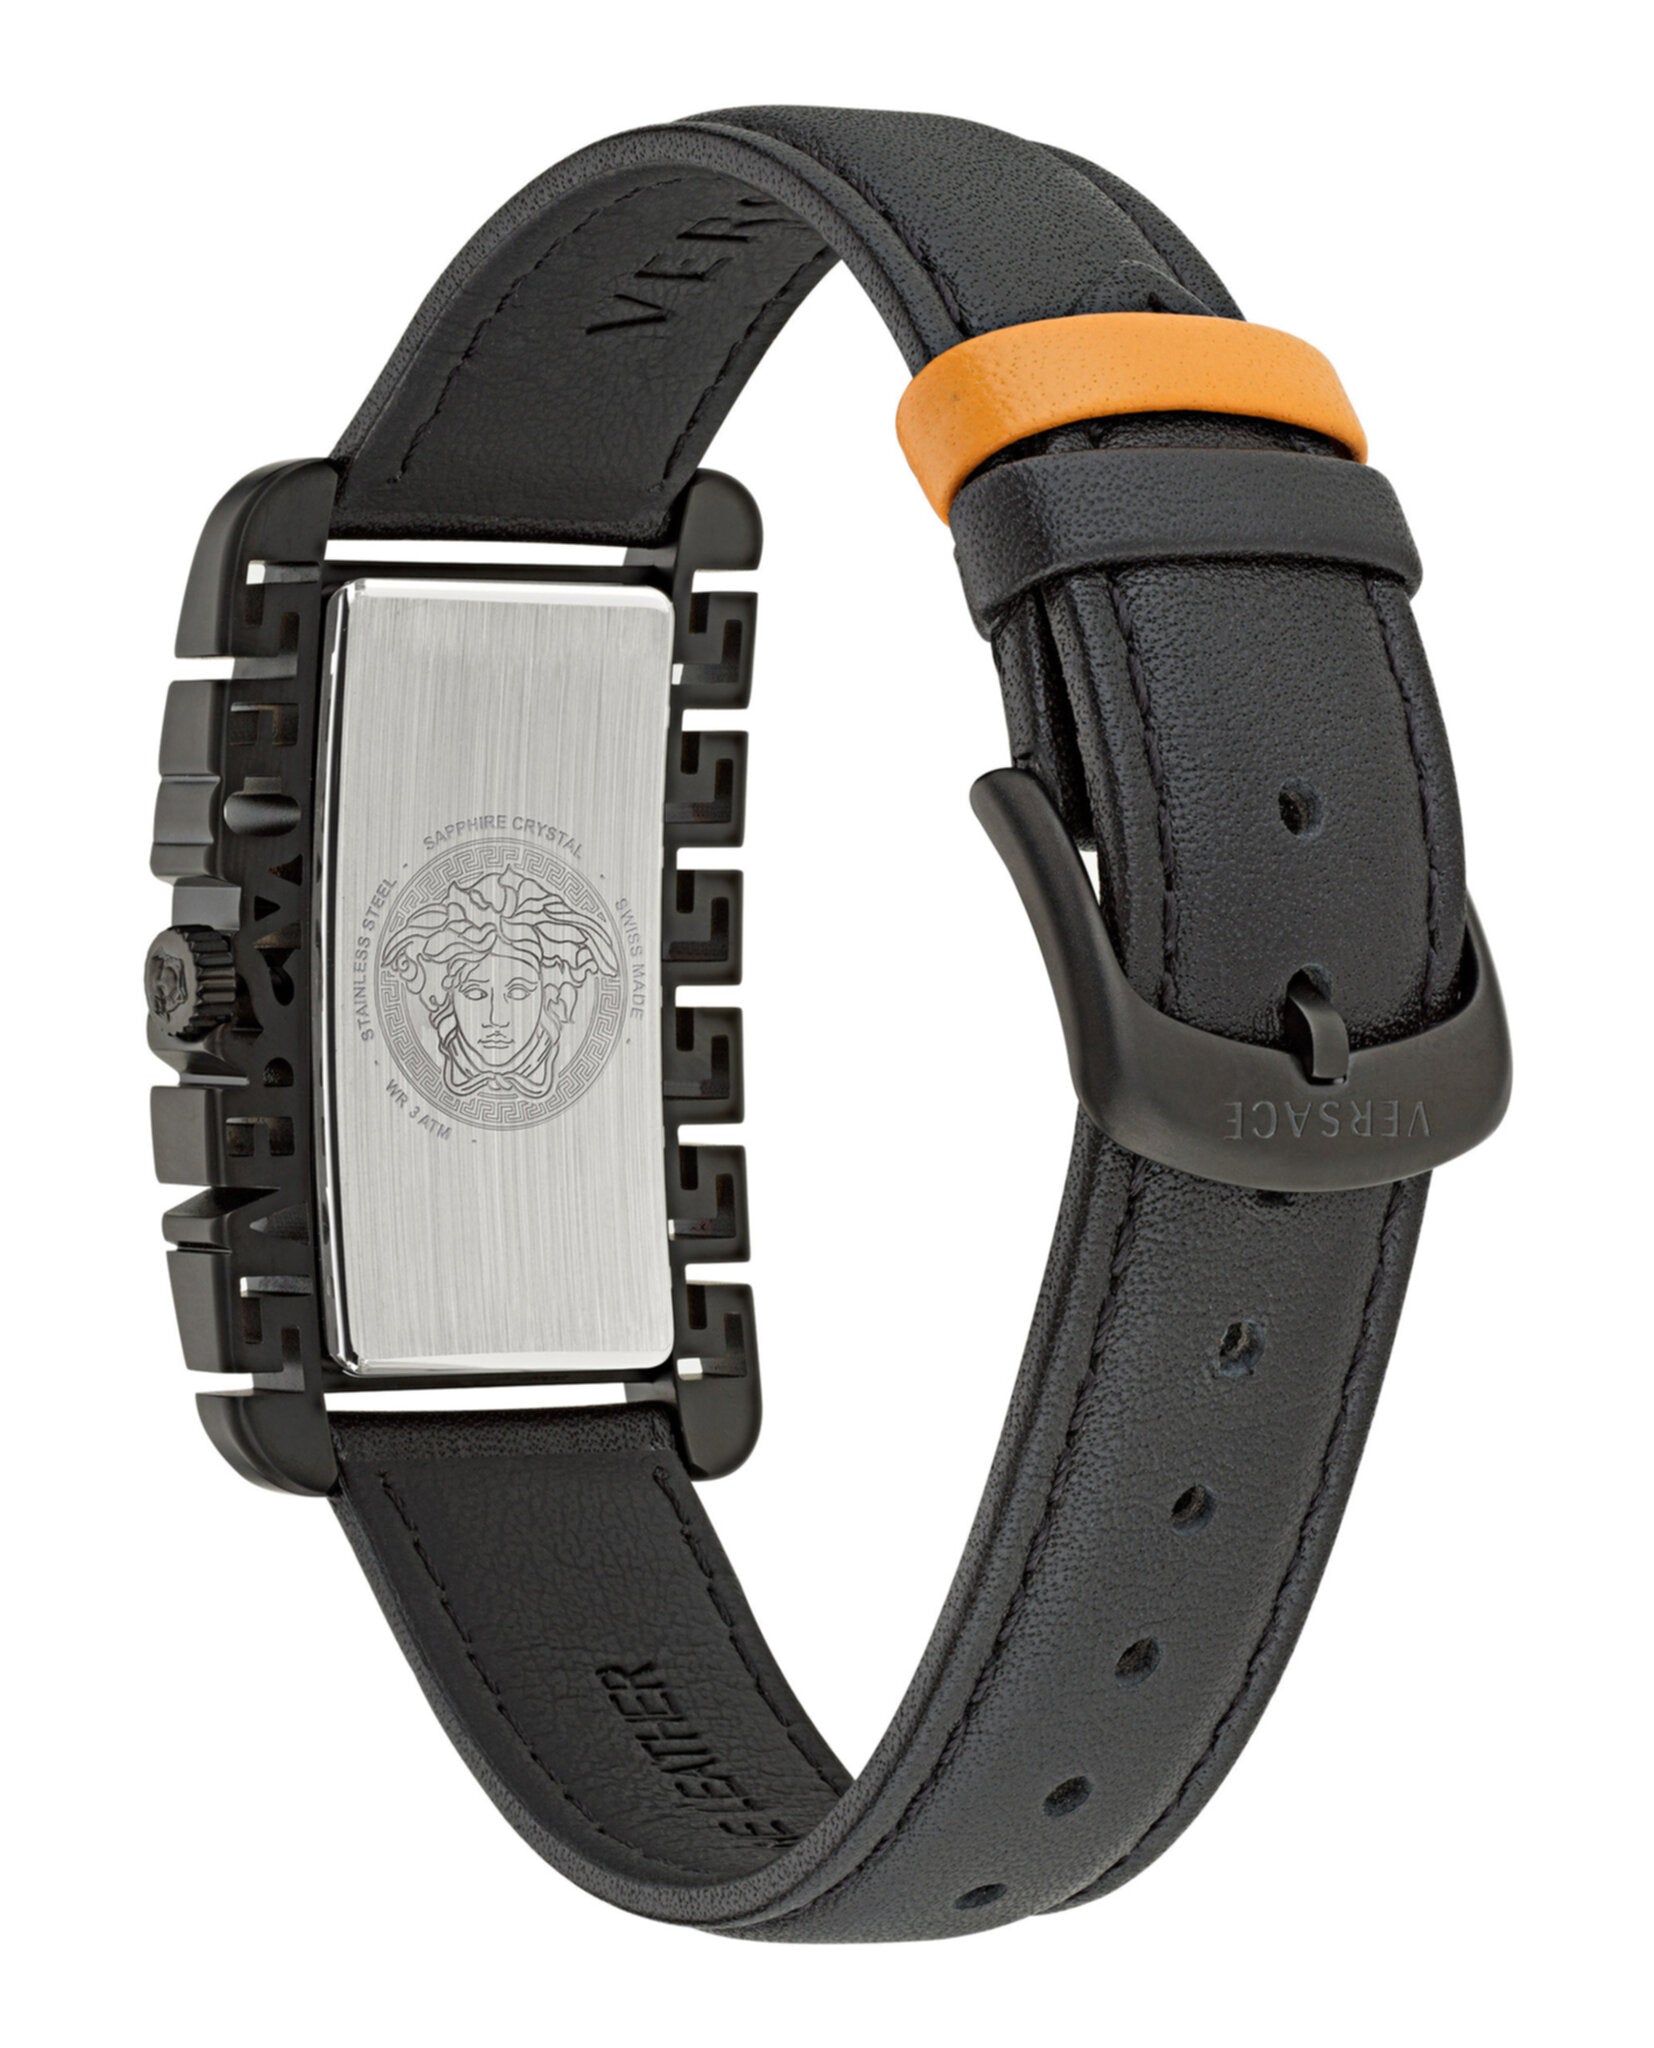 Versace Flair Leather Watch